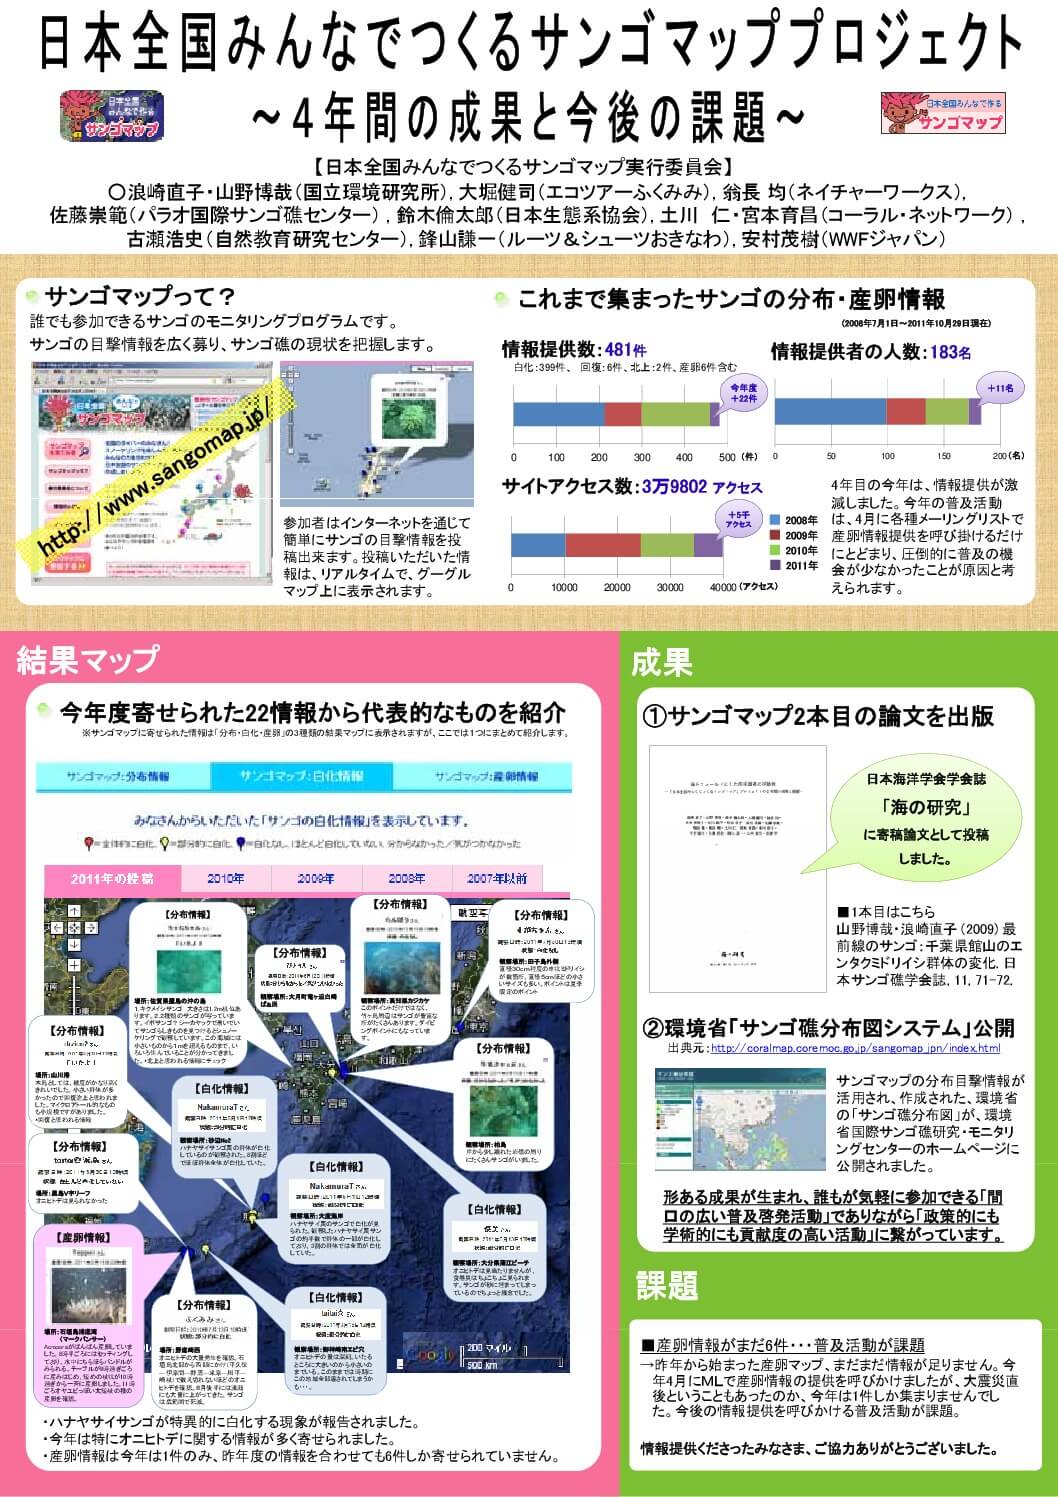 2011JCRS_Posterのサムネイル